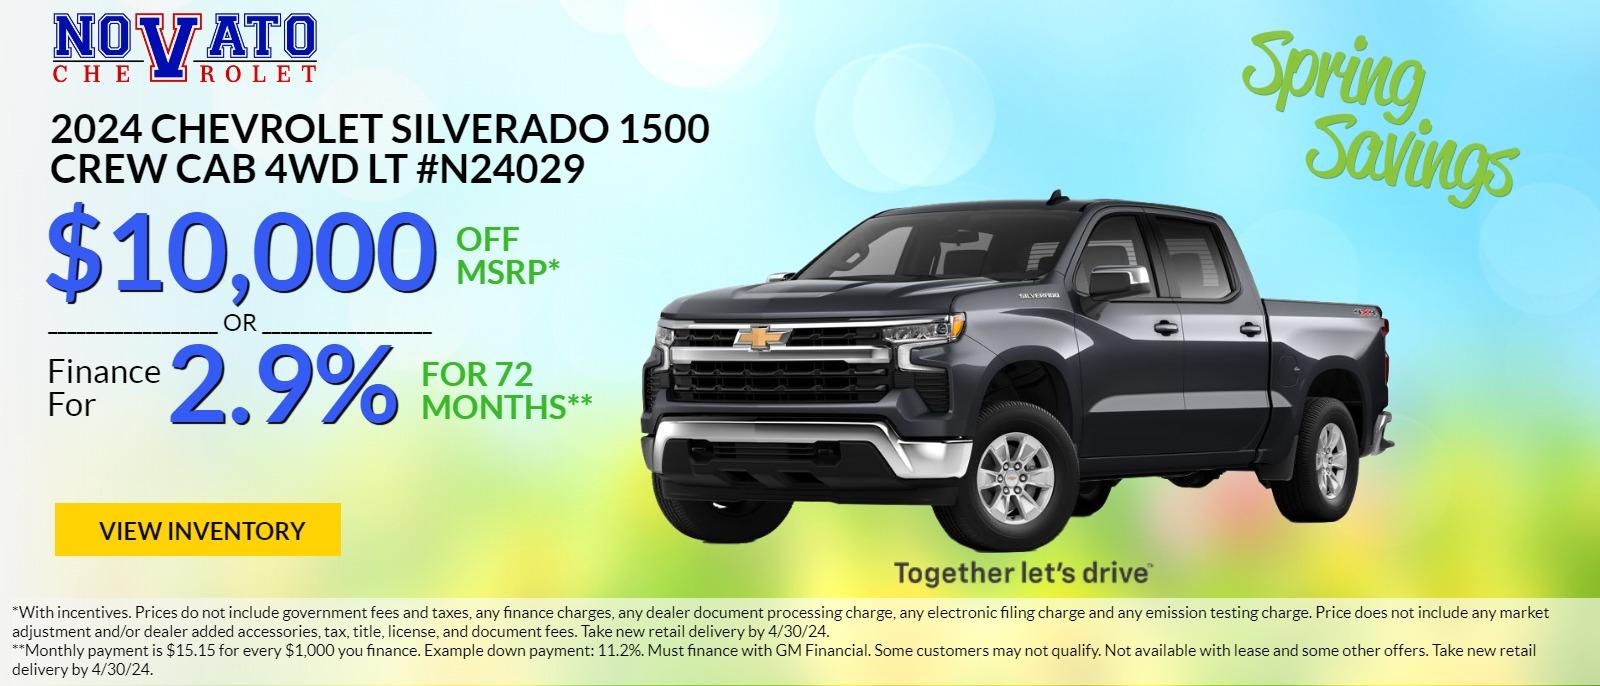 2024 Silverado 1500     
STOCK # N24029      
$10,000 OFF  MSRP OR    
stand alone   2.9% for 72 MONTHS